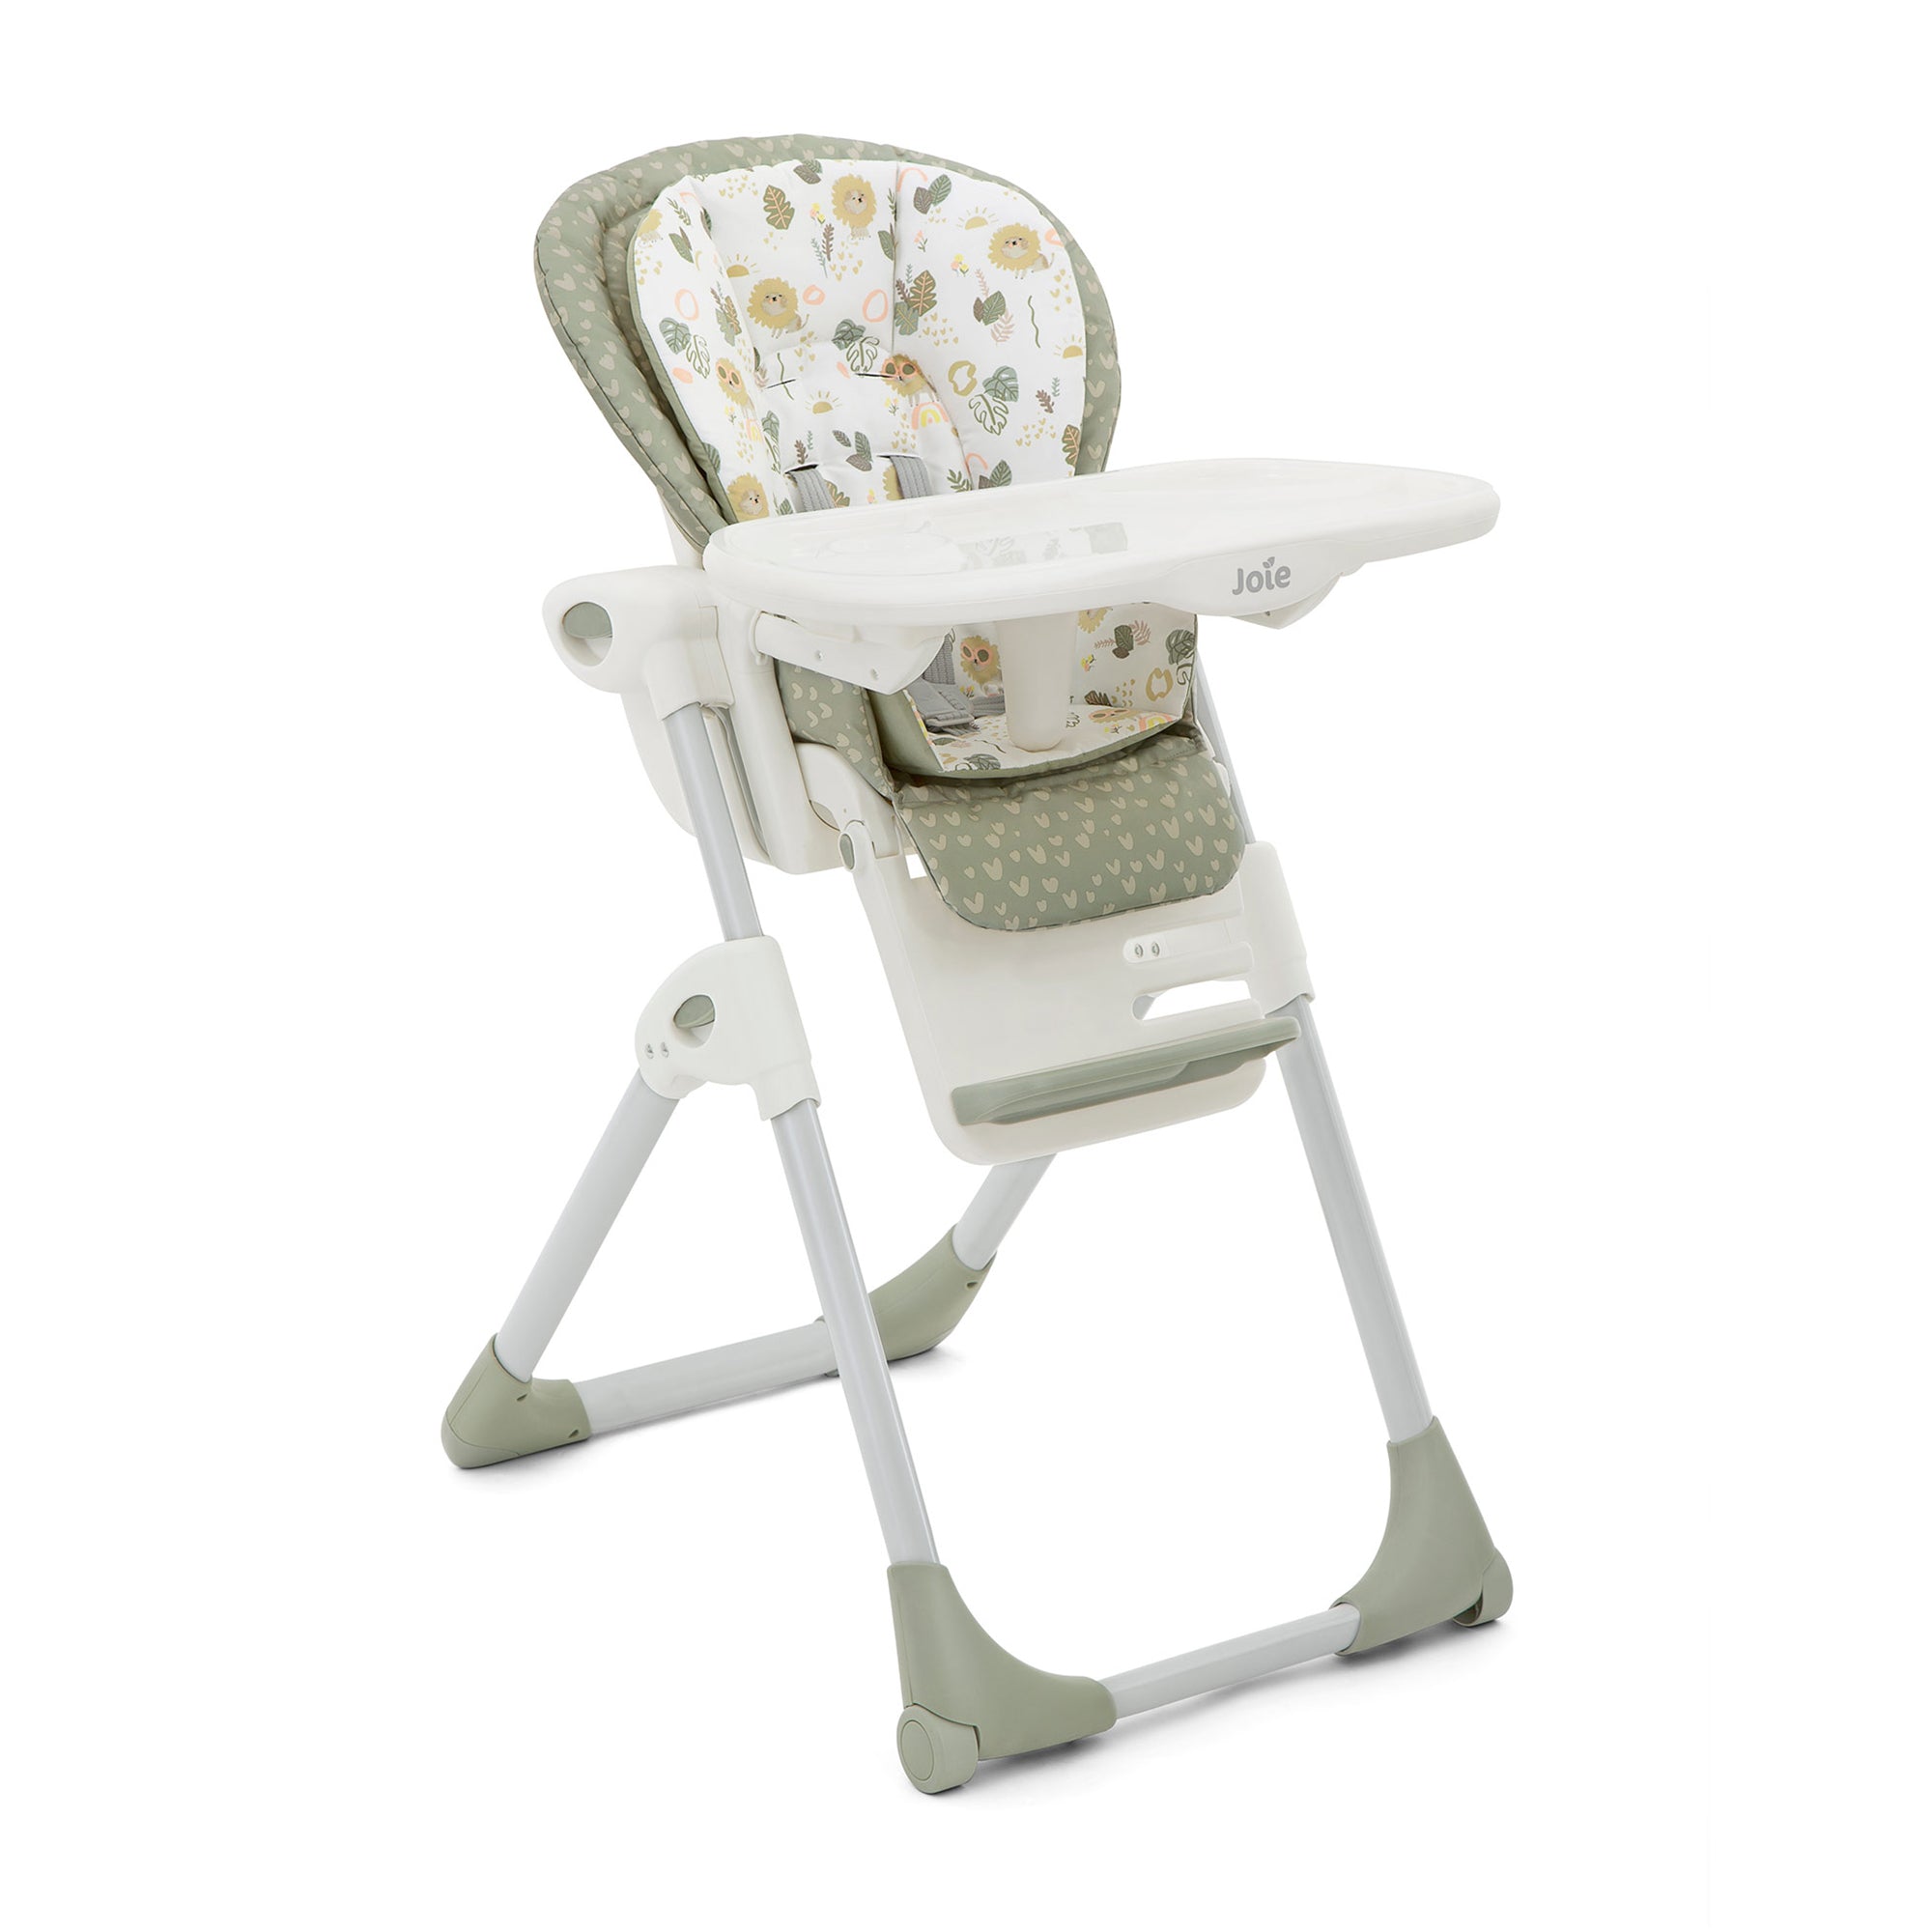 Joie Mimzy 2in1 High Chair || Fashion - Leo || 6months to 36months - Toys4All.in